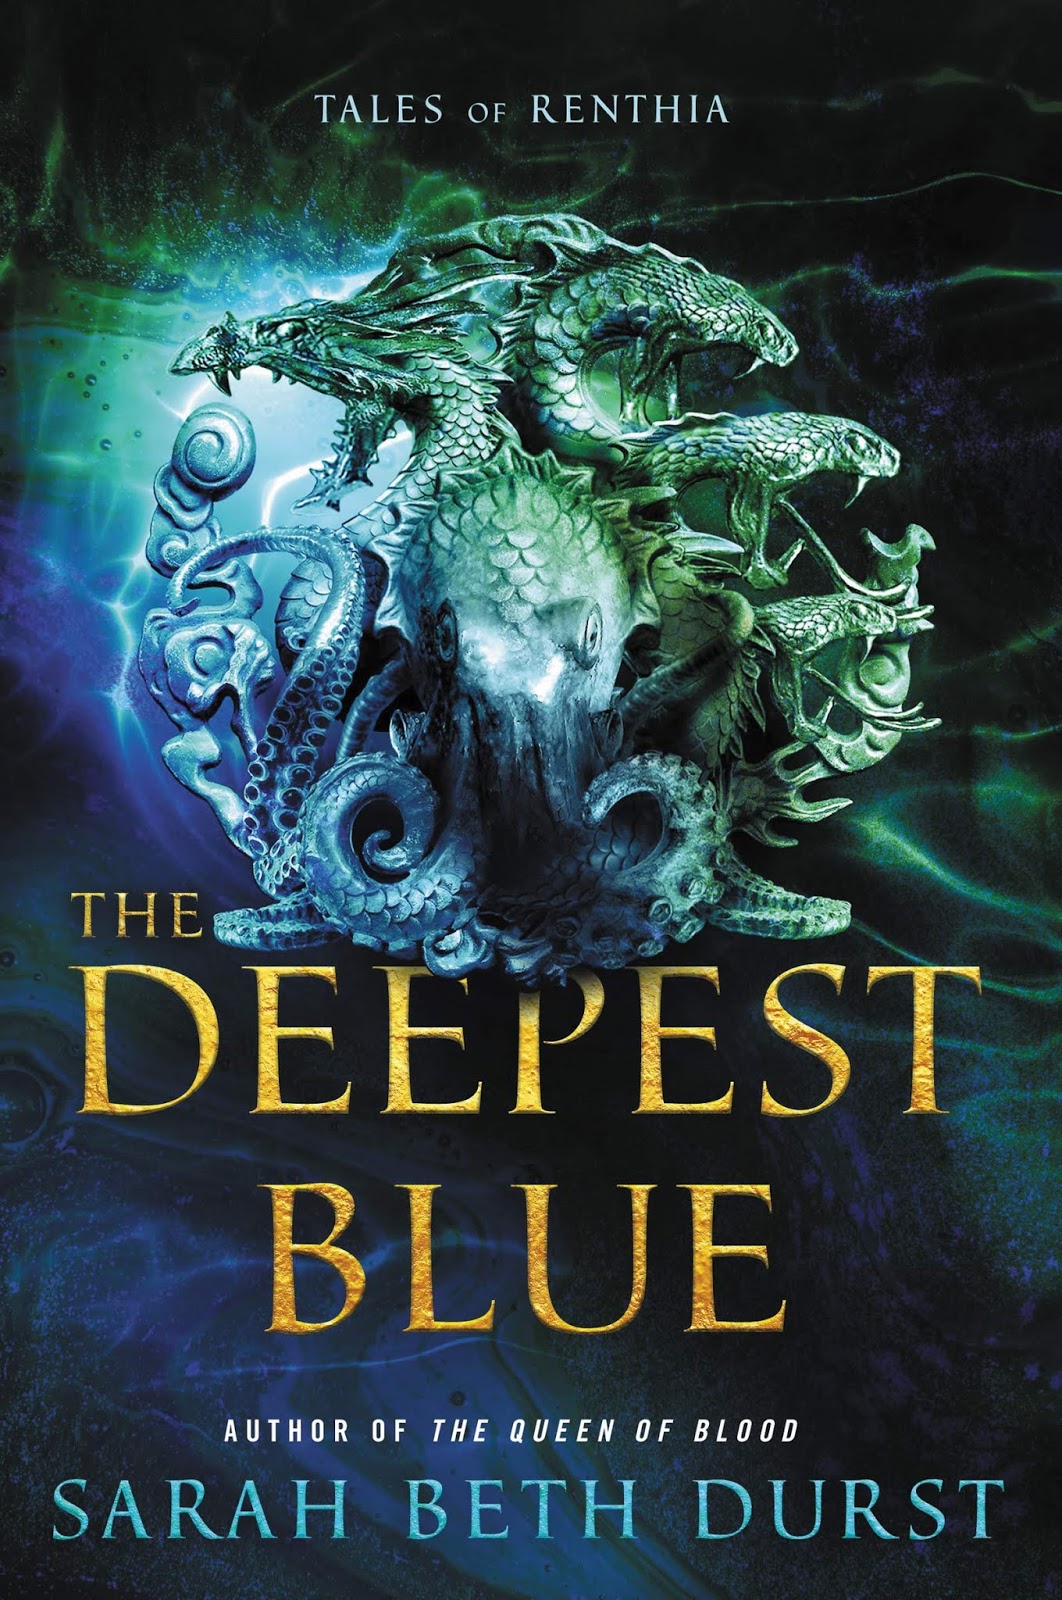 The Deepest Blue by Sarah Beth Durst